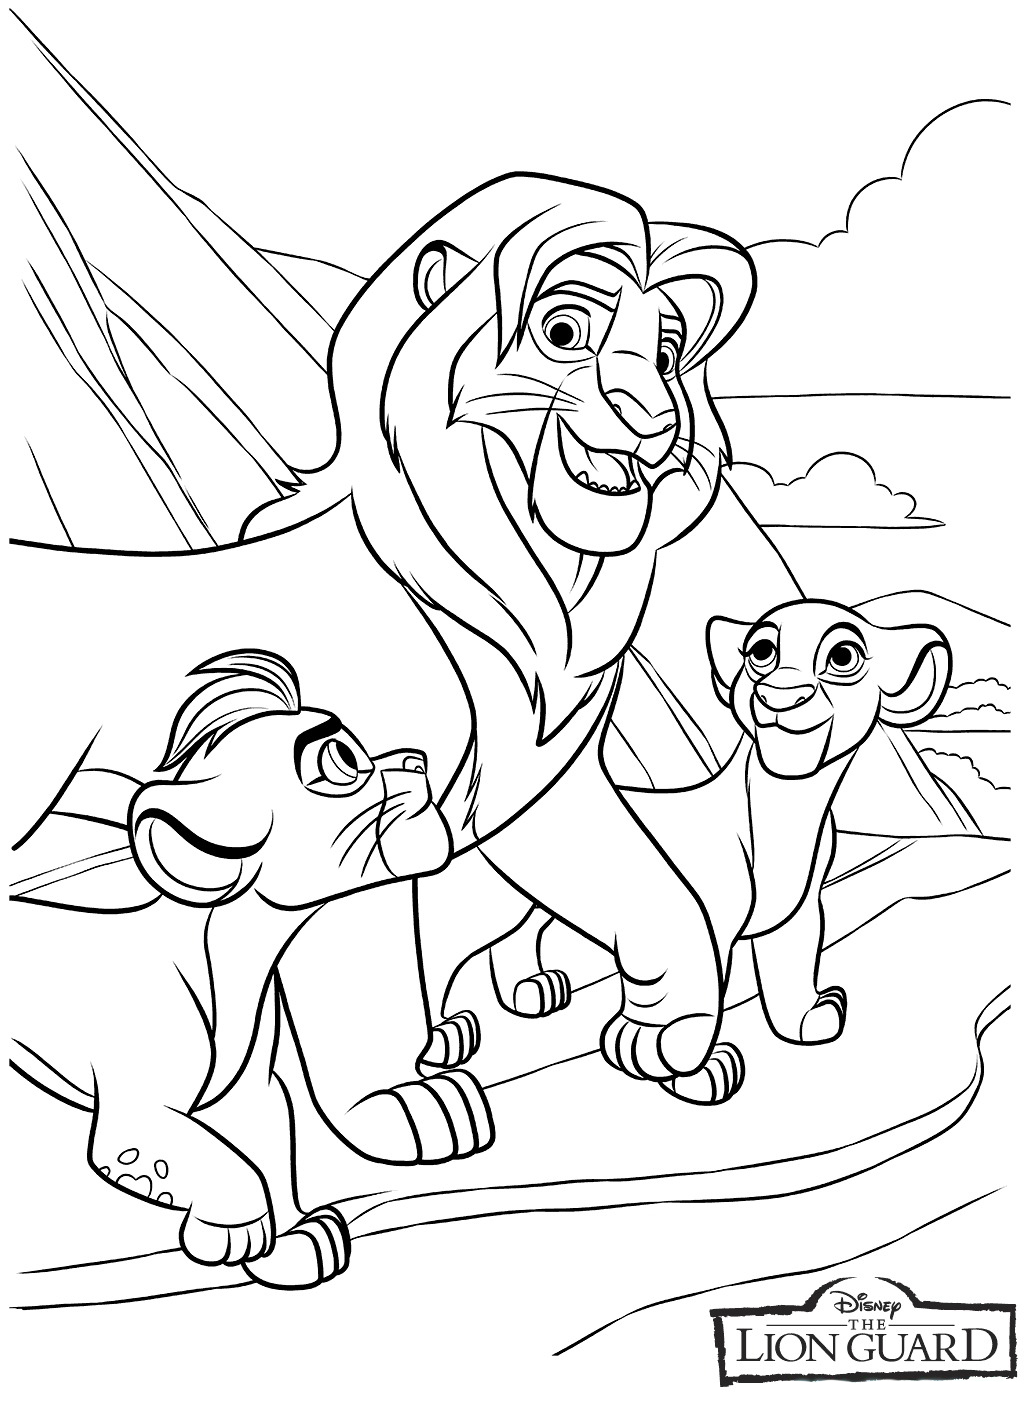 Download Lion Guard Coloring Pages - Best Coloring Pages For Kids